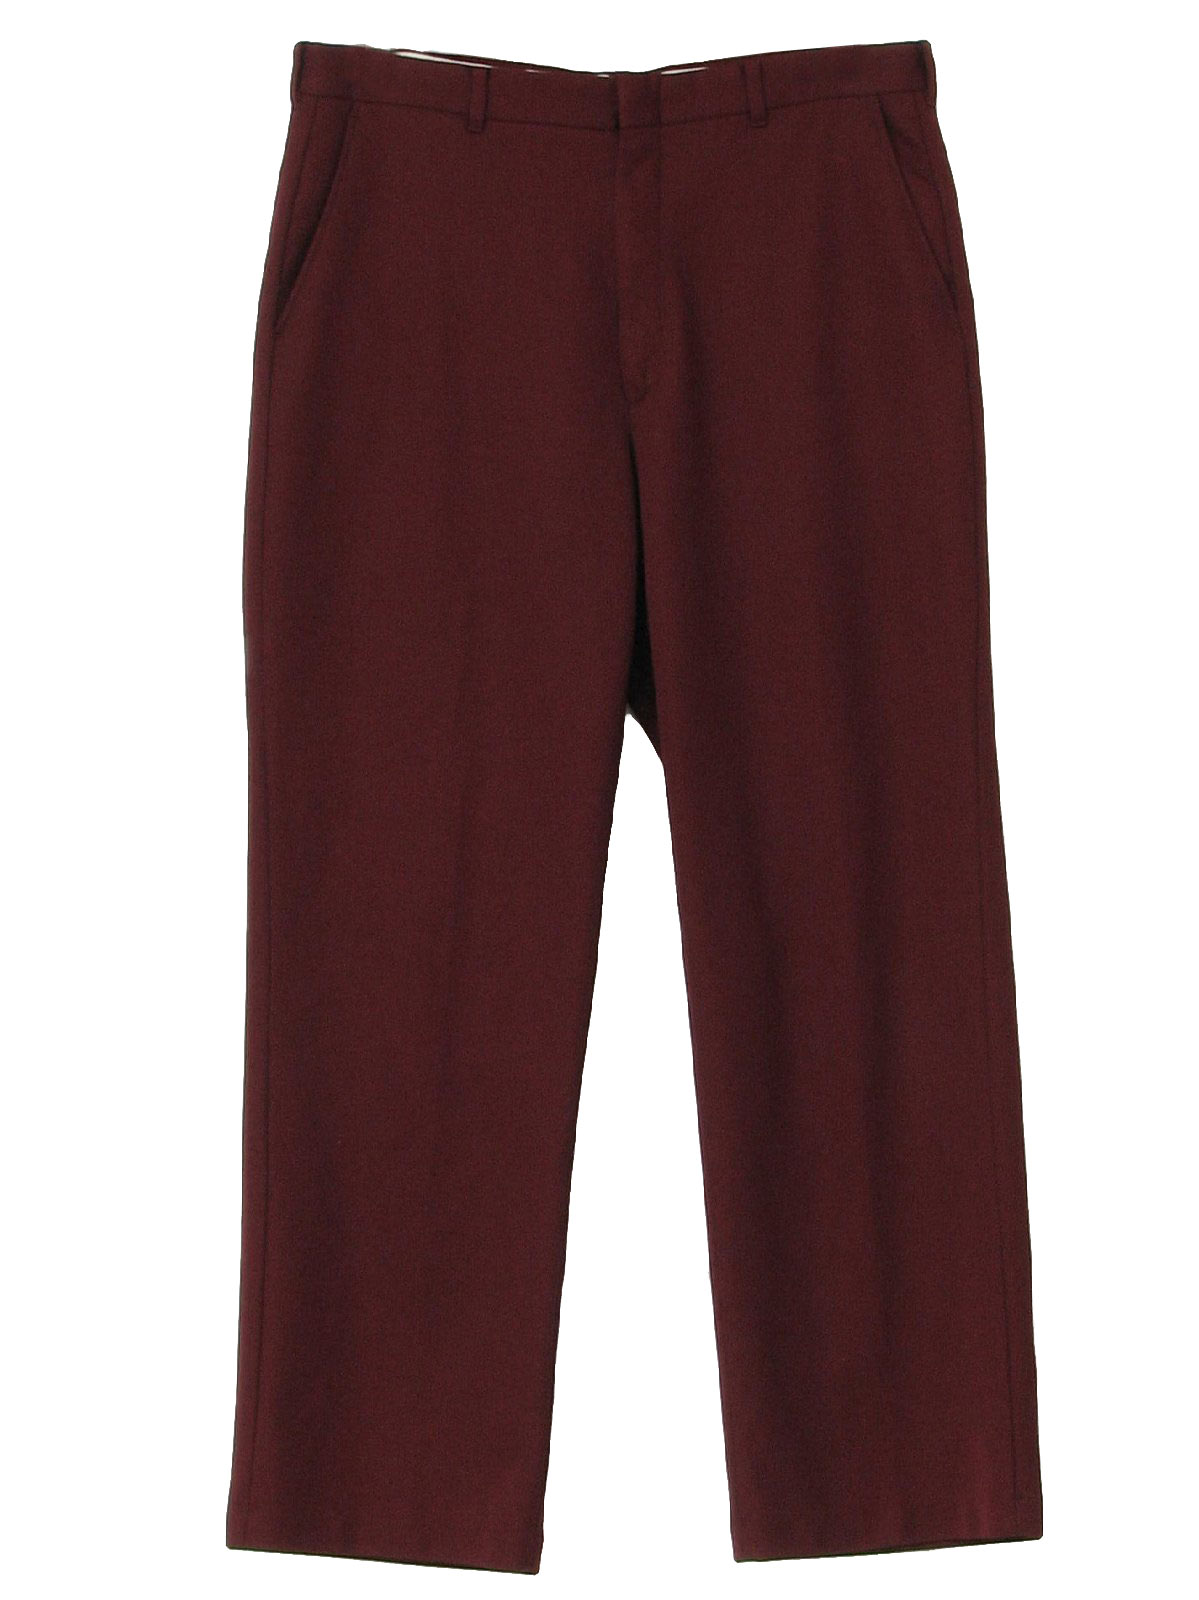 1970's Retro Pants: 70s -Haband- Mens maroon solid colored lightweight ...